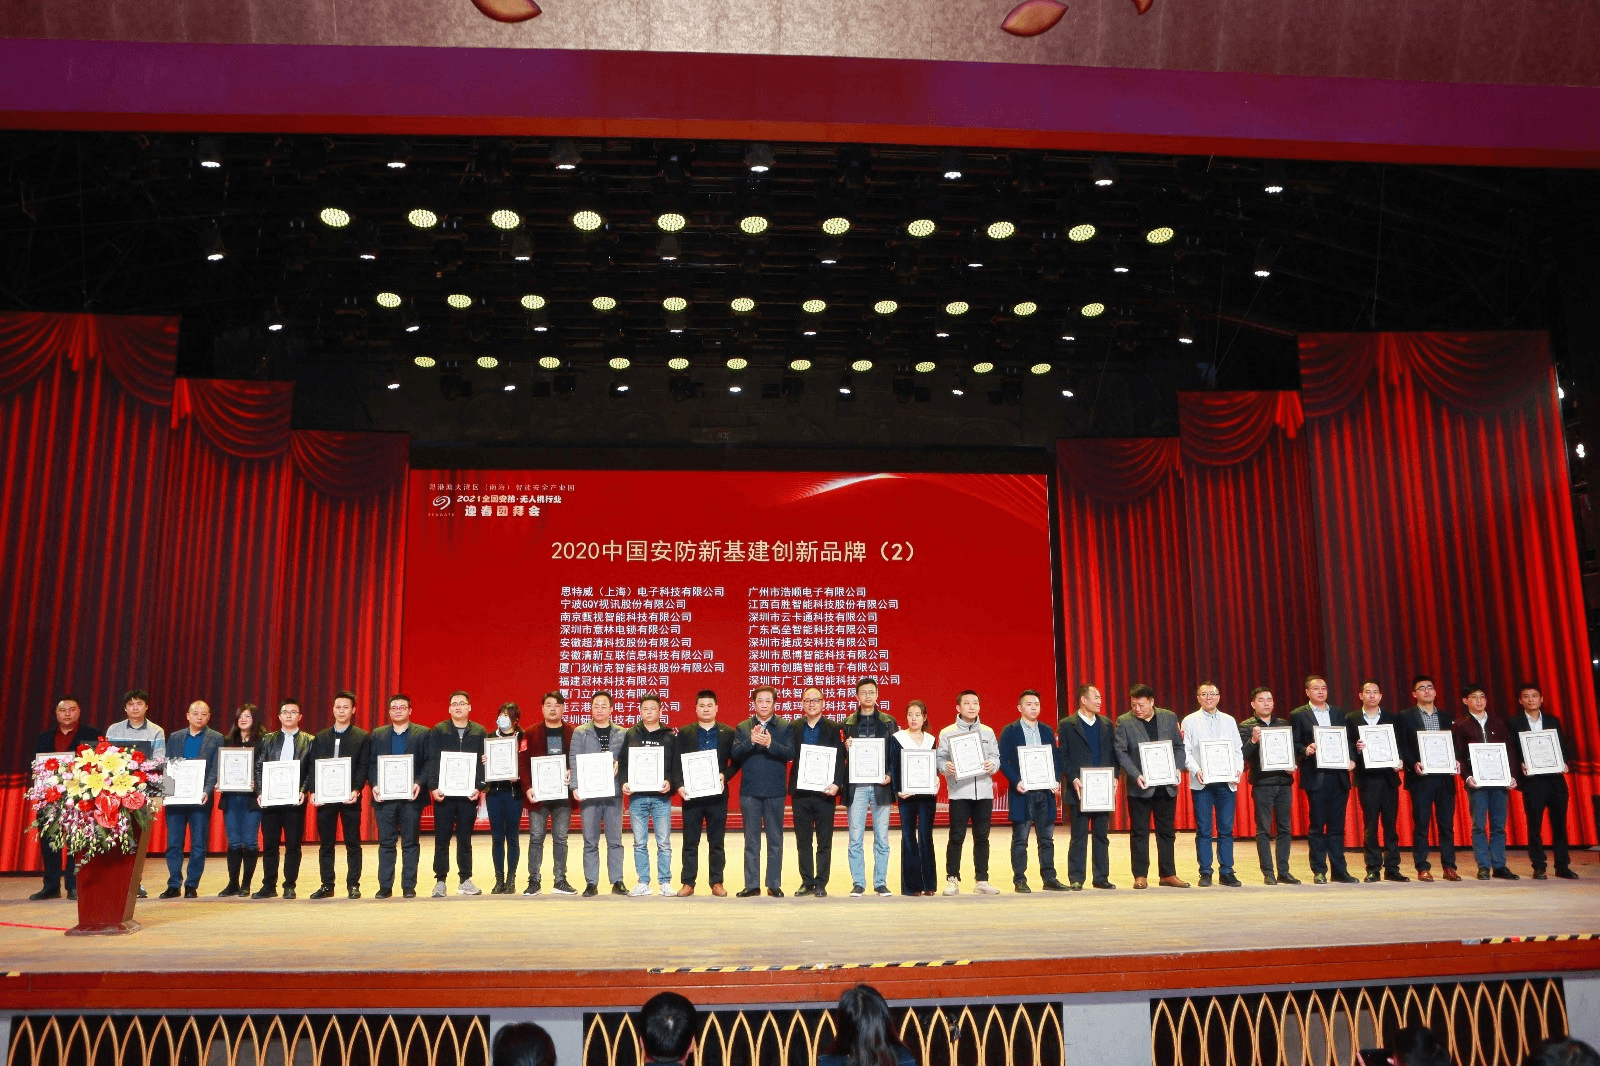 N-net won the "2020 China Smart City Construction Recommended Brand" and "2020 China 